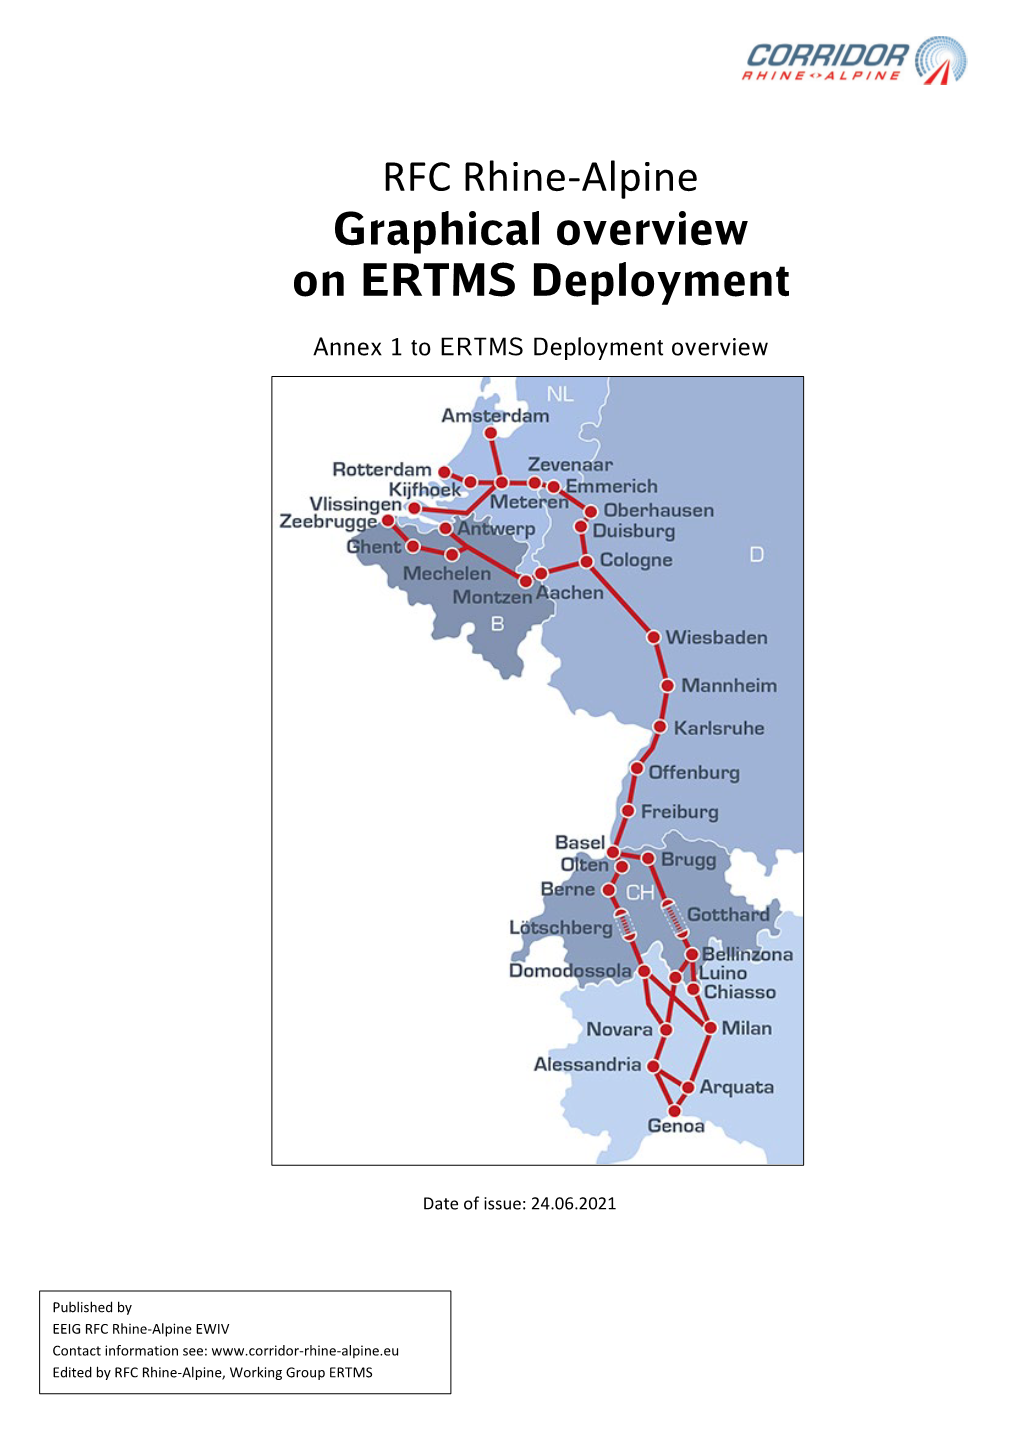 RFC Rhine-Alpine Graphical Overview on ERTMS Deployment